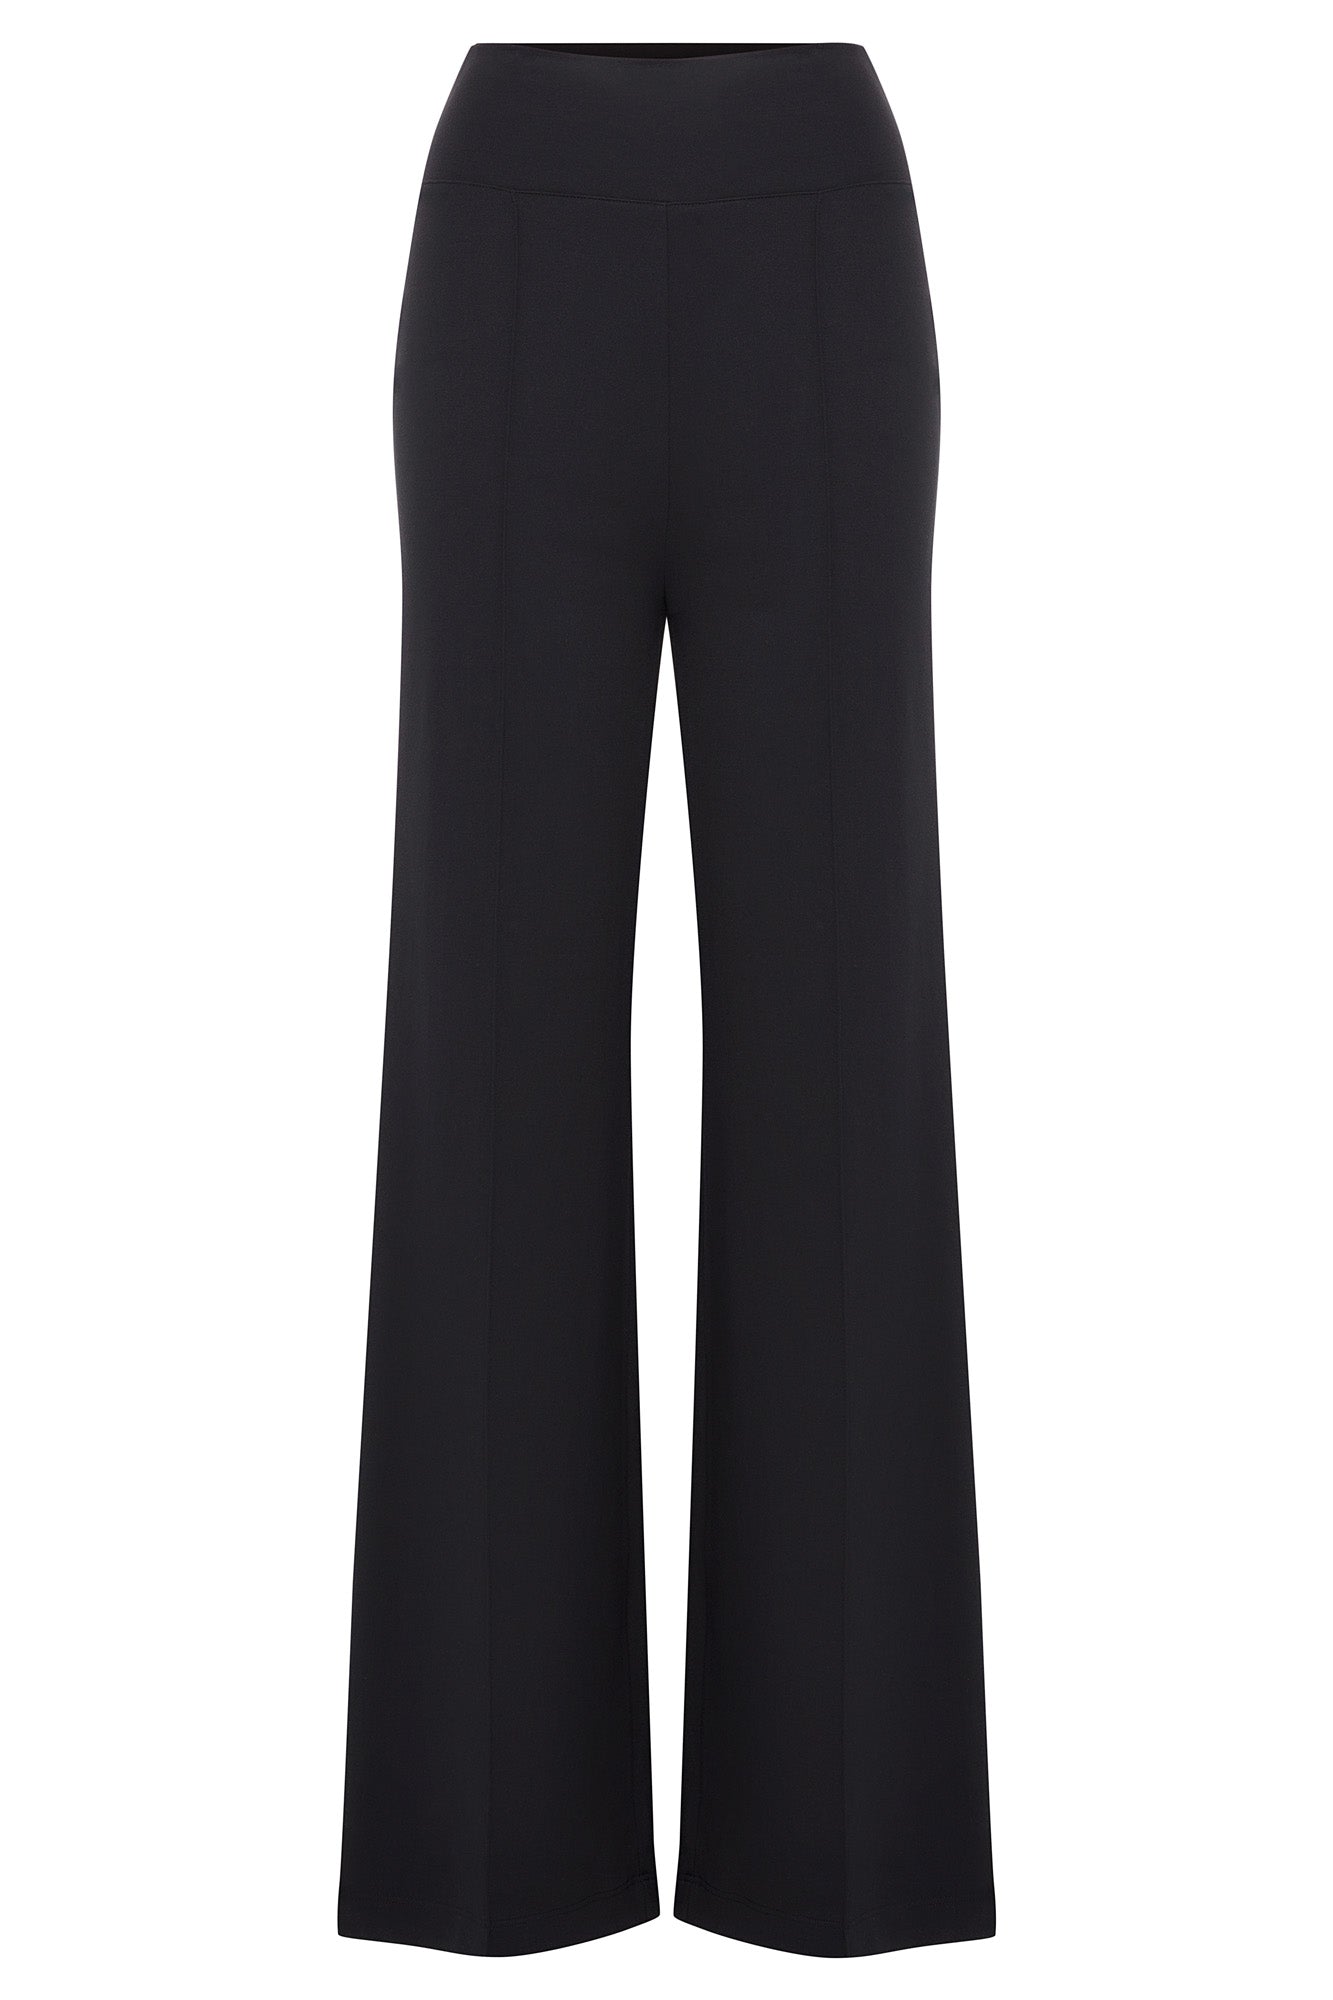 Buy AND Womens Cotton-Stretch Pants | Shoppers Stop